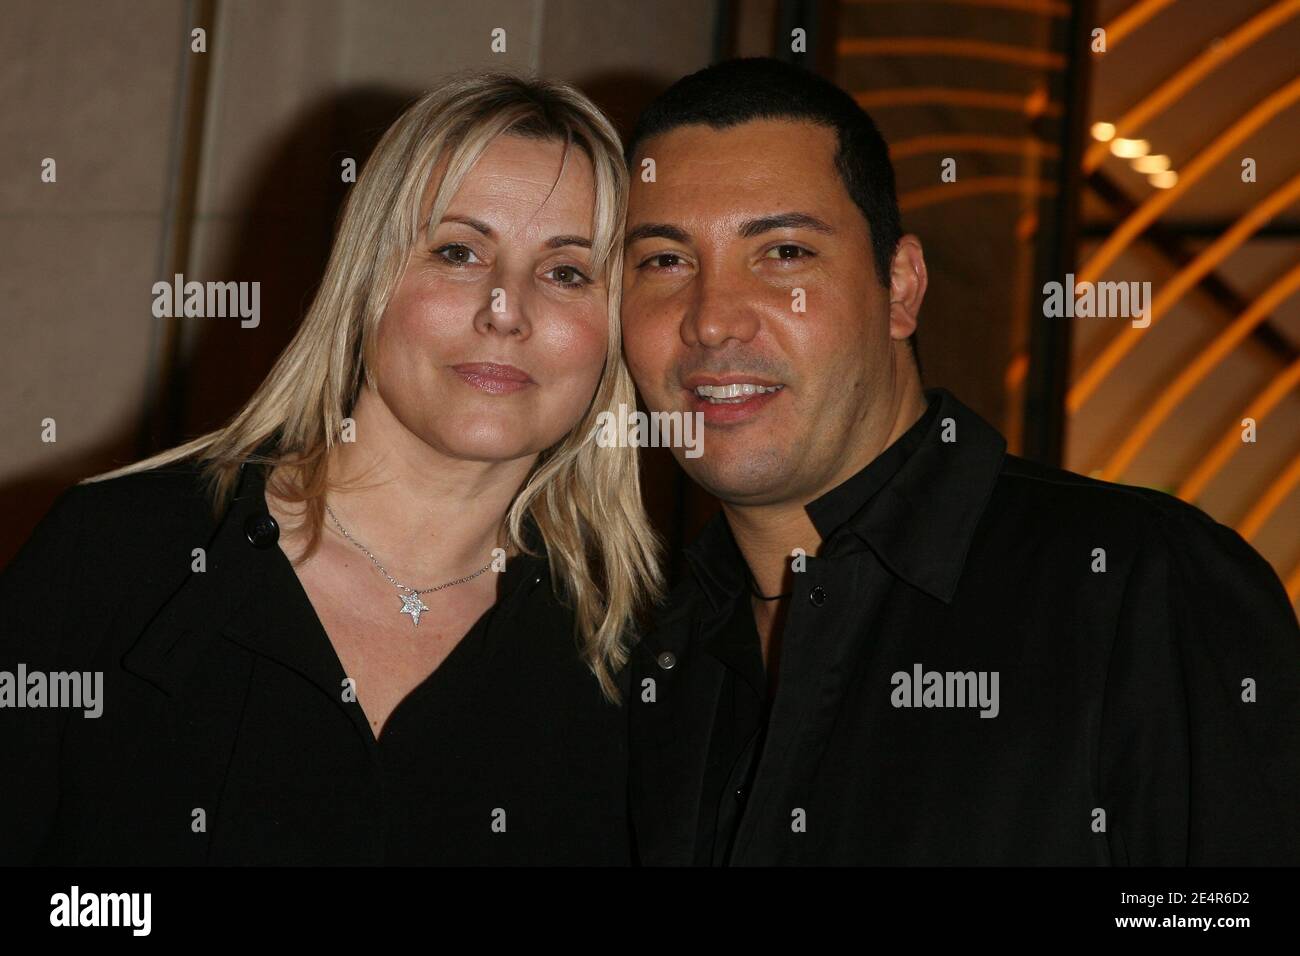 Sophie Favier and a friend Cedric attend the opening of new 'Fendi' store on Avenue Montaigne in Paris, France on February 29, 2008. Photo by Guignebourg-Nebinger-Orban-Taamallah/ABACAPRESS.COM Stock Photo